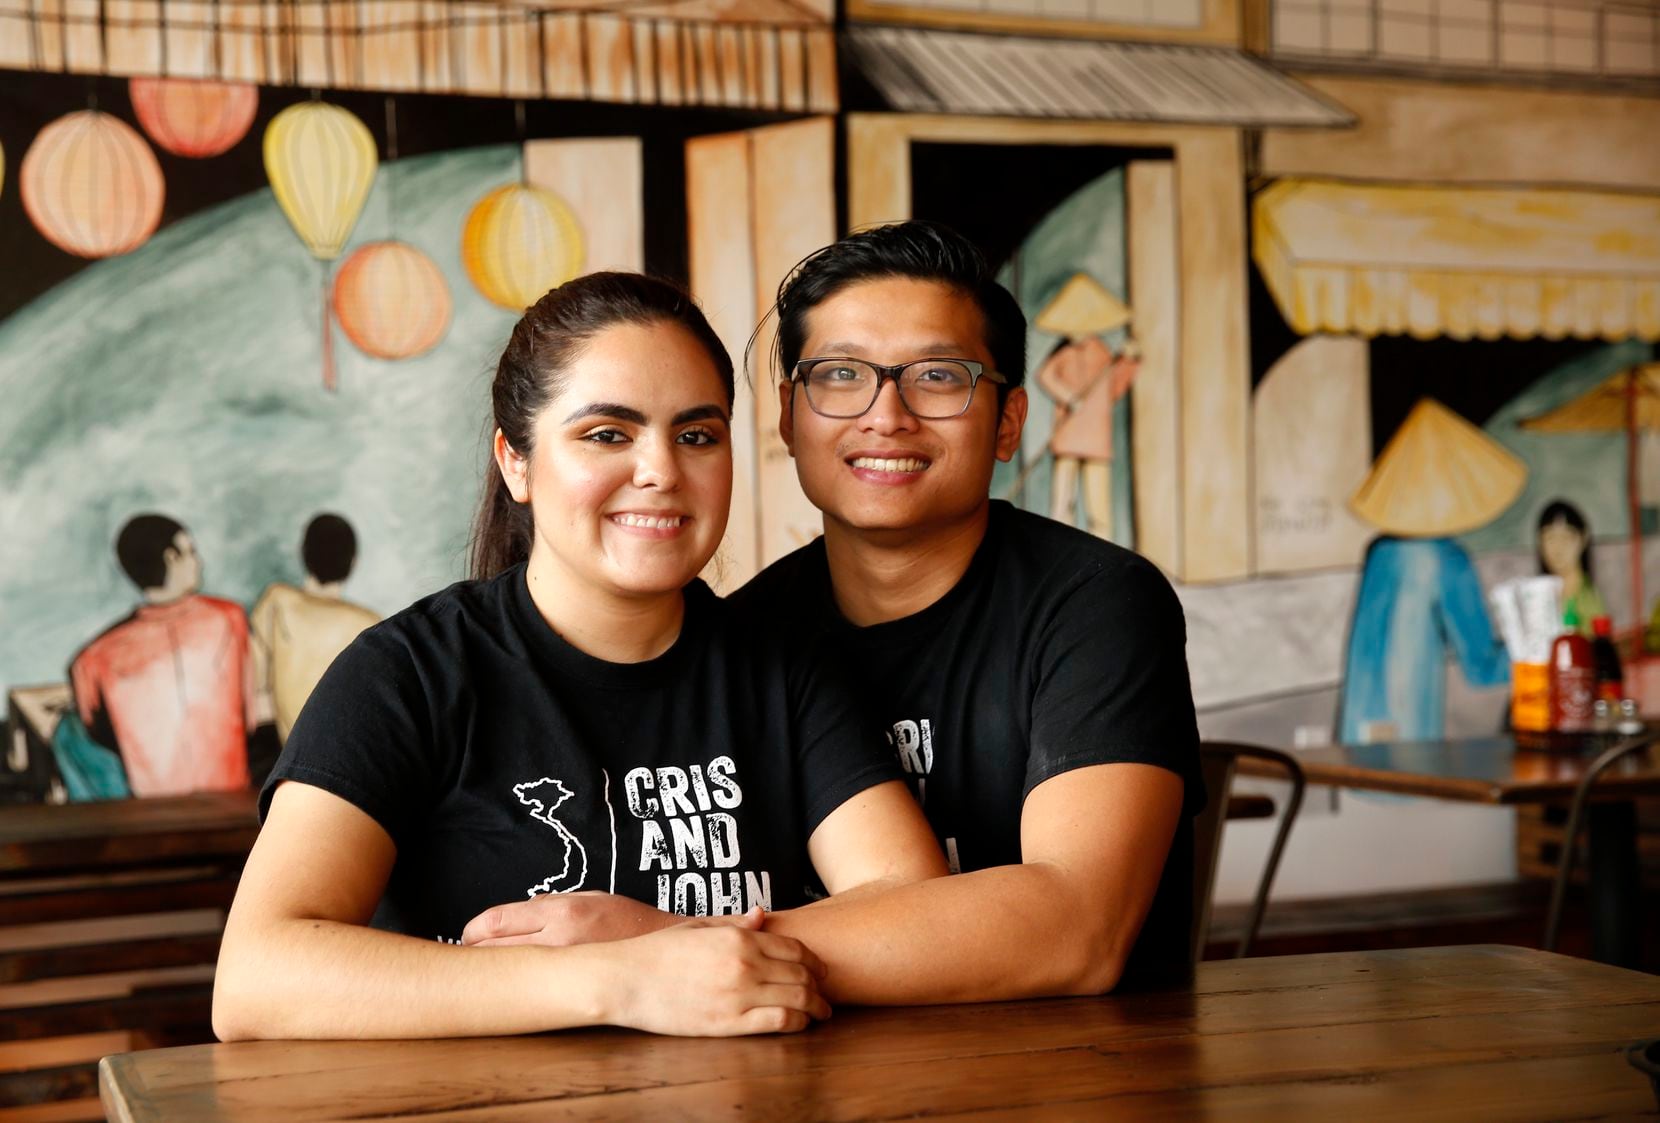 Owners John and Cristina Pham, shown at their Cris and John - Vietnamese Street Food restaurant in Far North Dallas in February 2018.